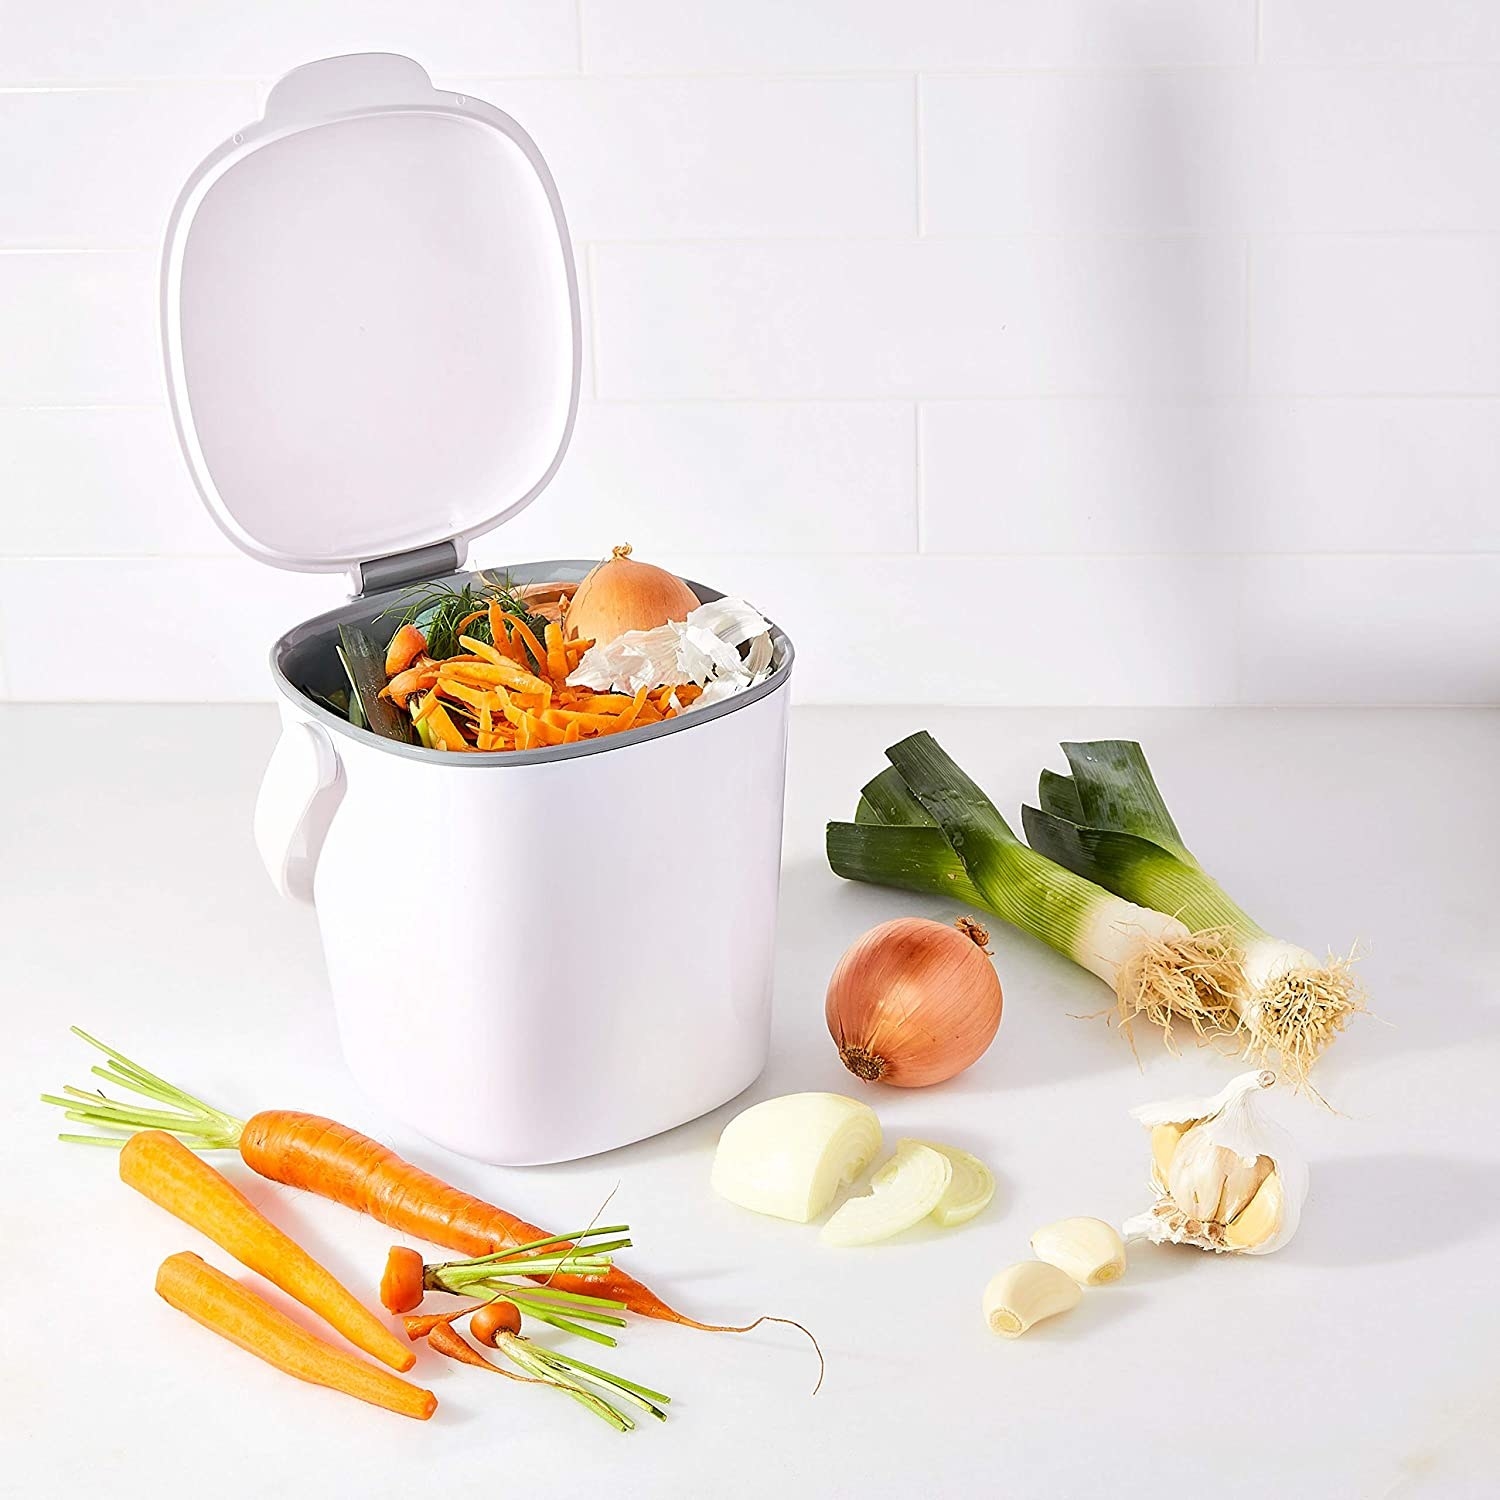 A white compost bin full of vegetable pieces 